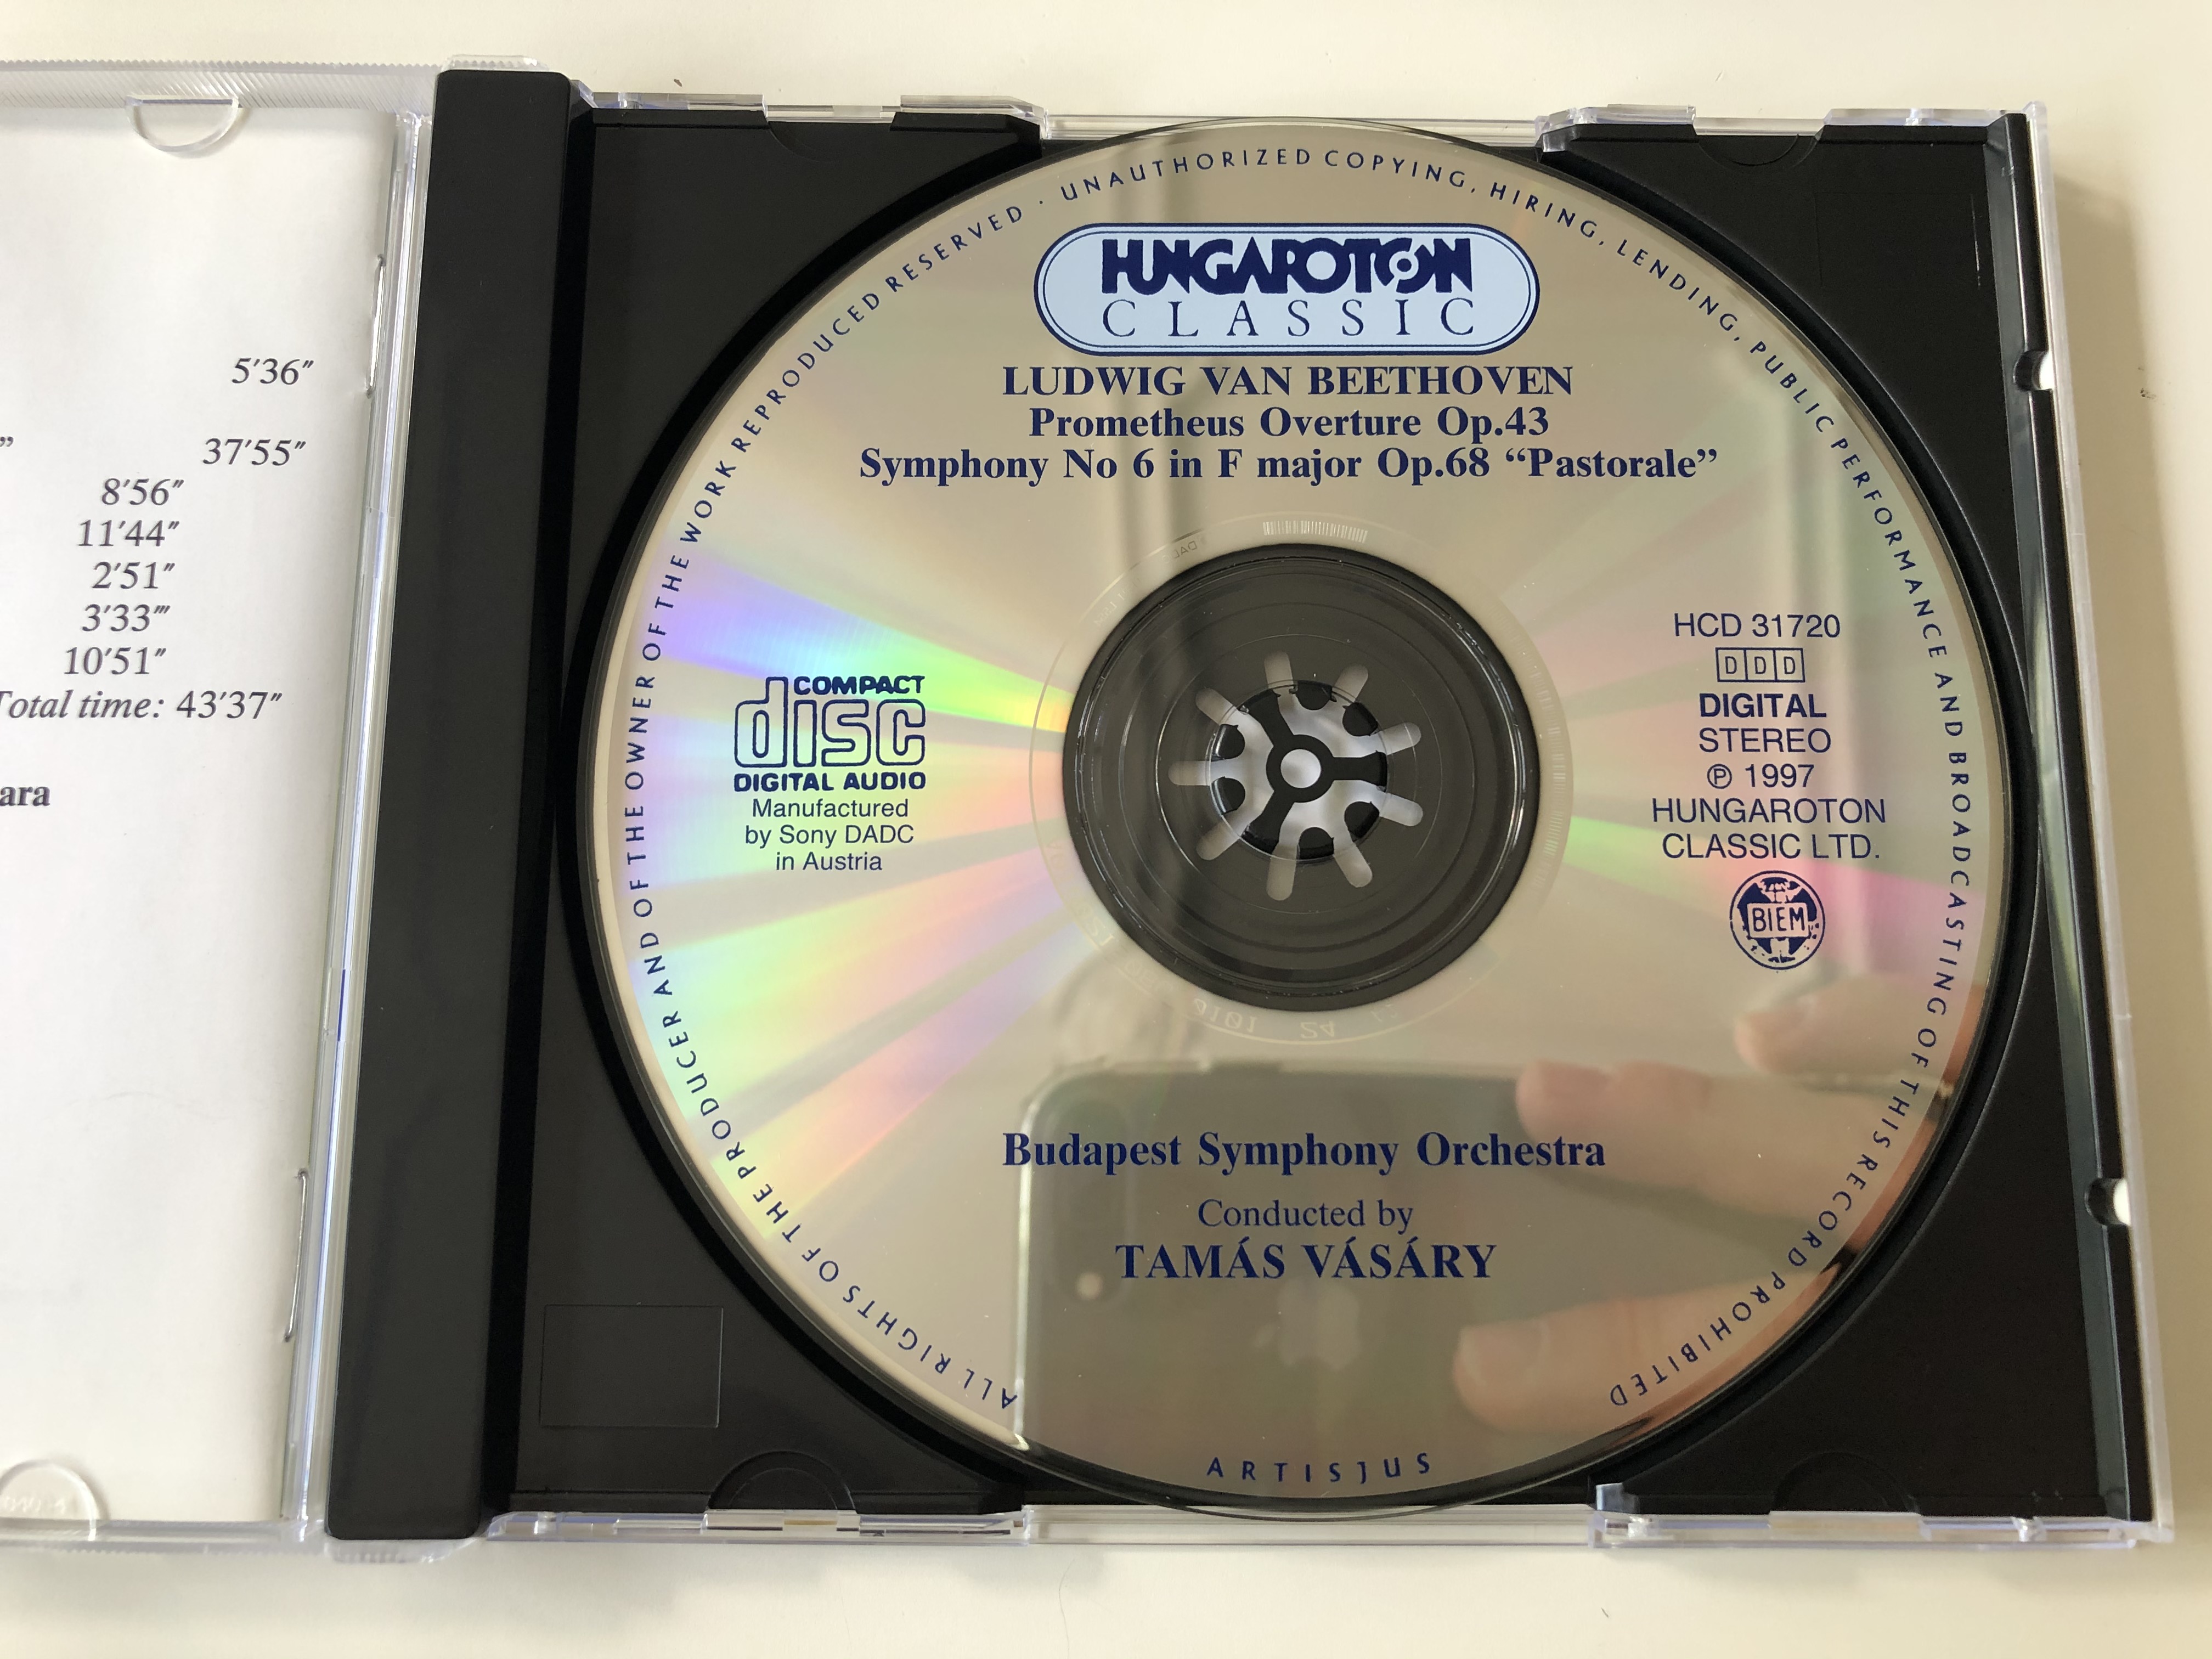 beethoven-symphony-no.-6-pastorale-prometheus-overture-budapest-symphony-orchestra-conducted-by-tamas-vasary-live-recording-hungaroton-classic-audio-cd-1997-stereo-hcd-31720-6-.jpg